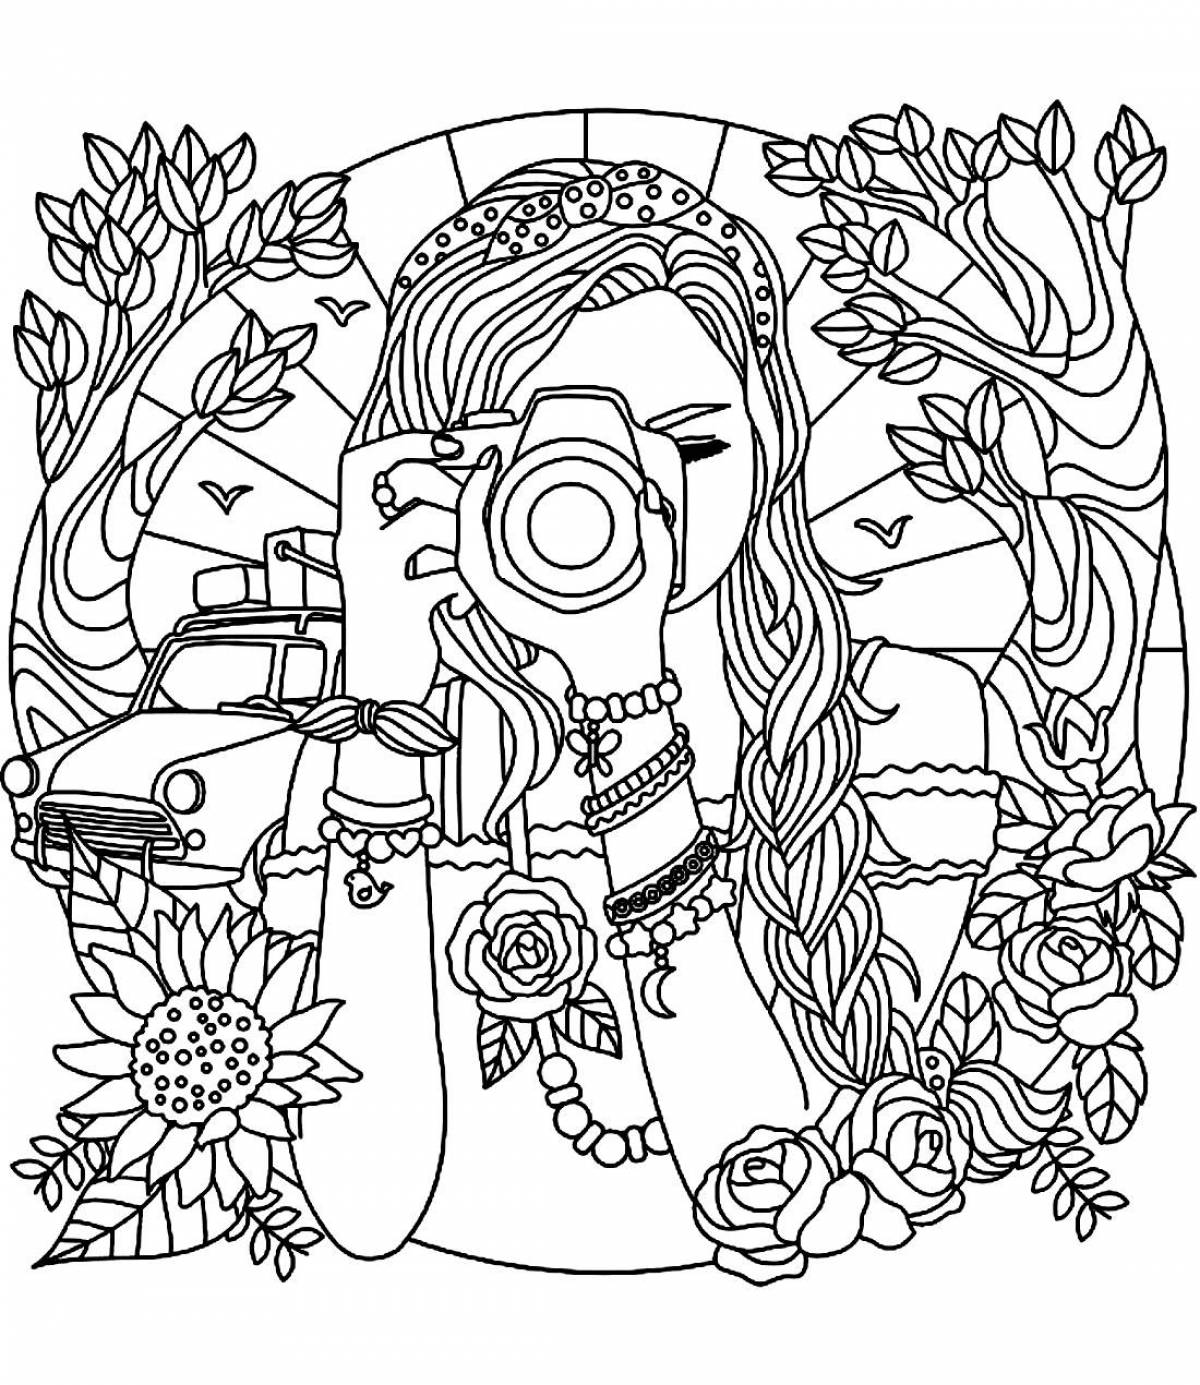 Colourful coloring pages for girls 10 years old